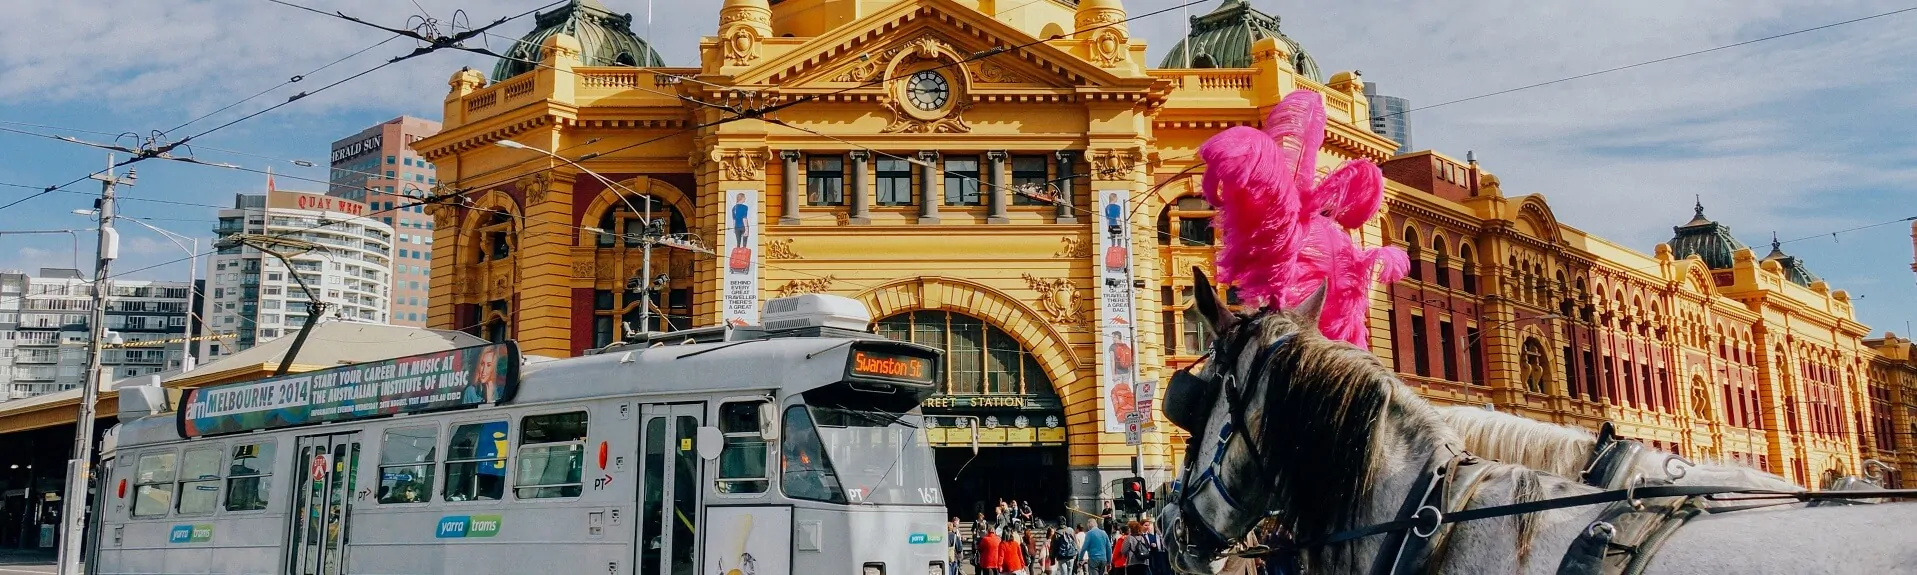 How do I spend a day in Melbourne?